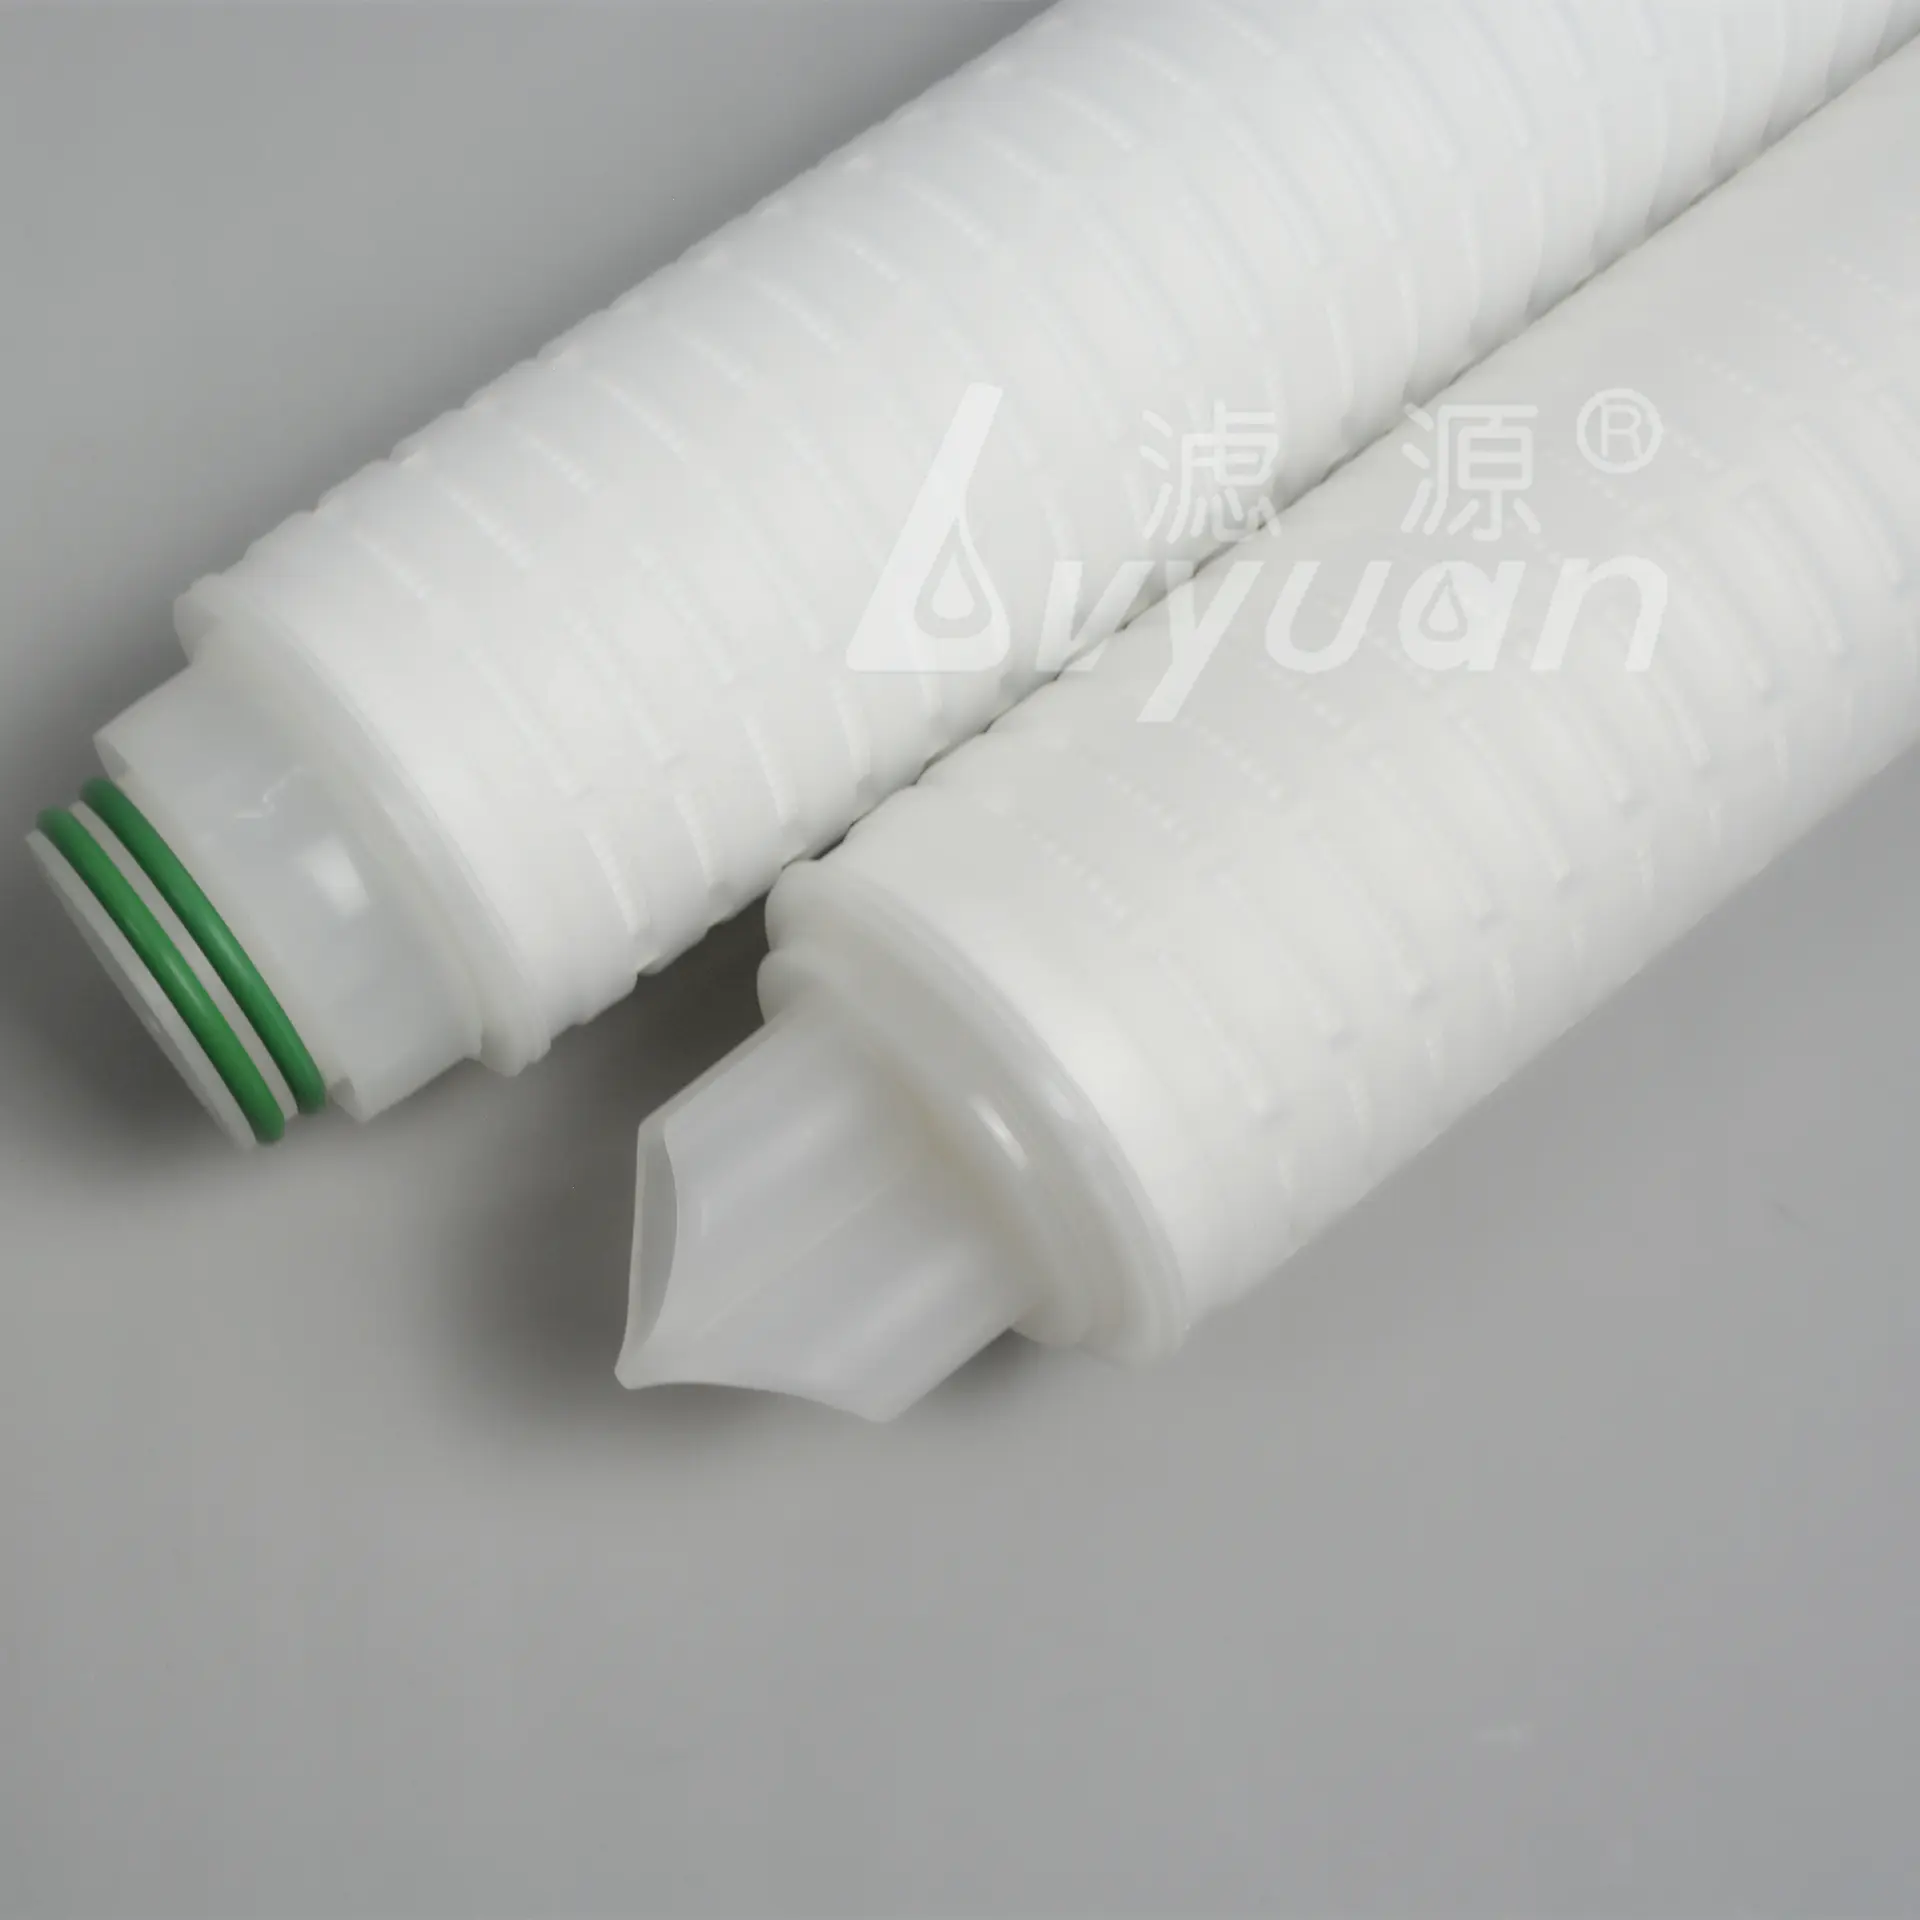 0.2 micron 0.45um 10 inch PTFE membrane pleated filter cartridges for respiratory vent filtration